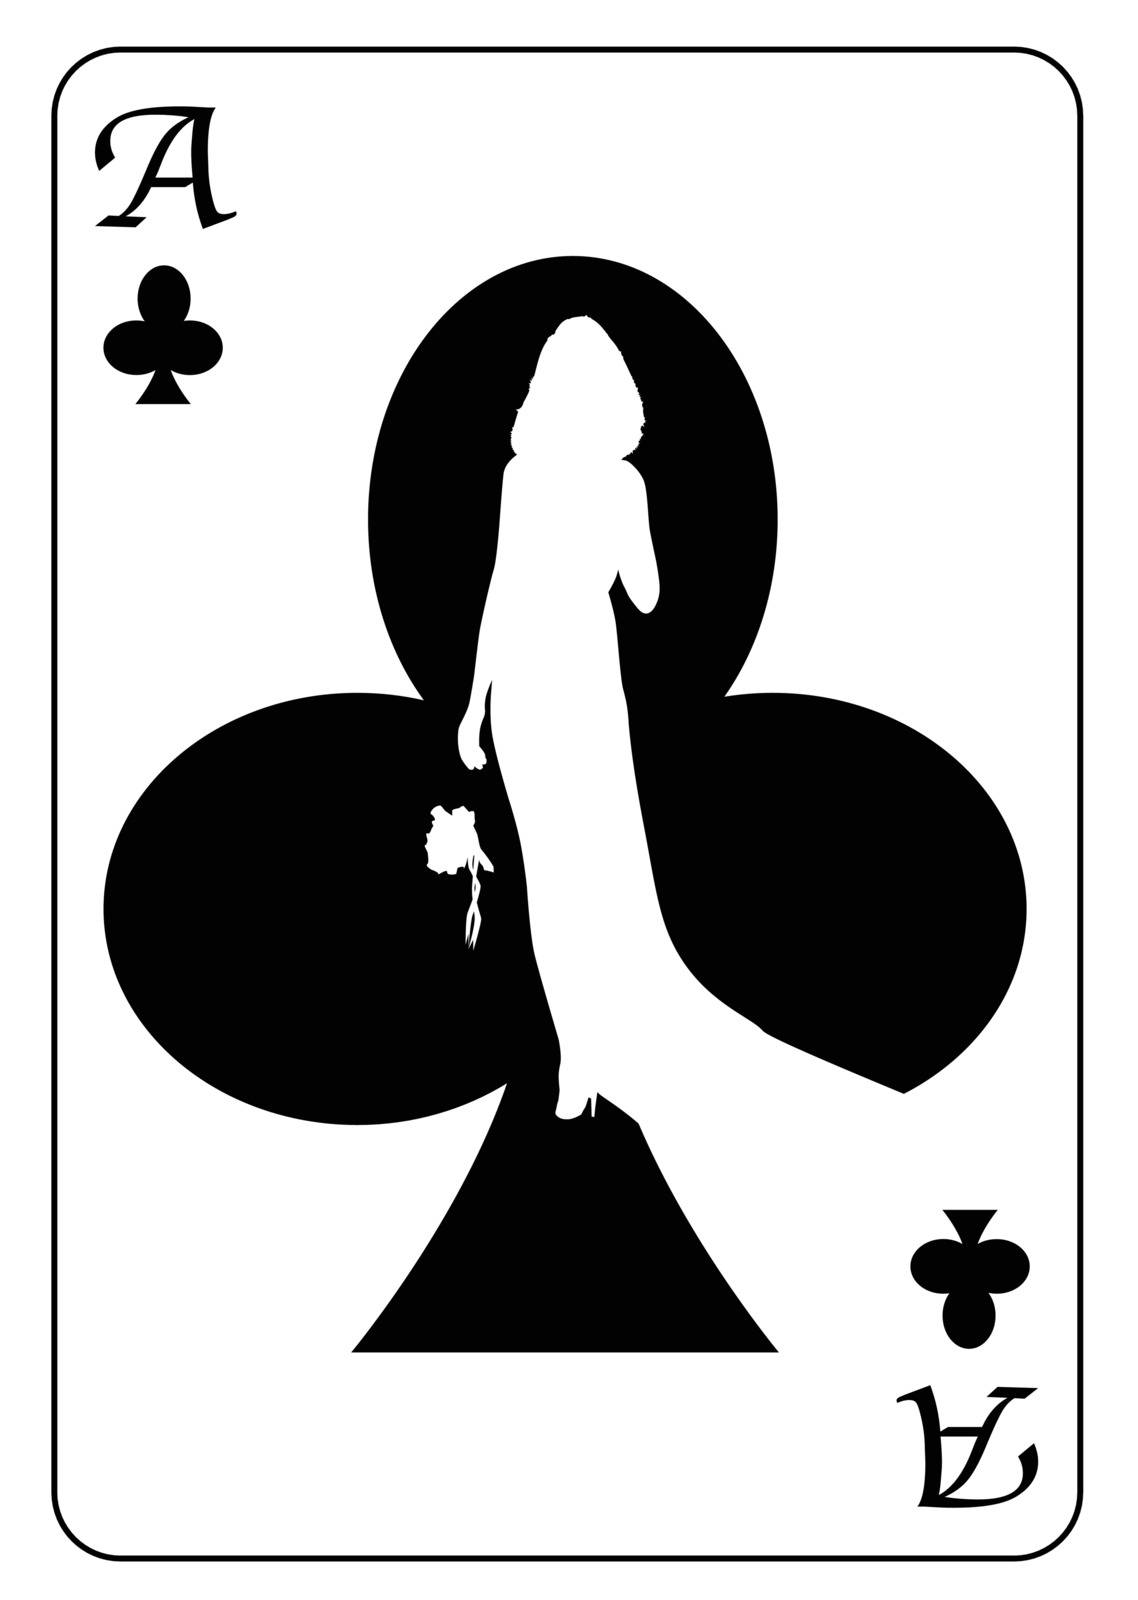 The ace of clubs with the silhouette of bride looking for her soul mate set into the motif of the card, all isolated on a white background